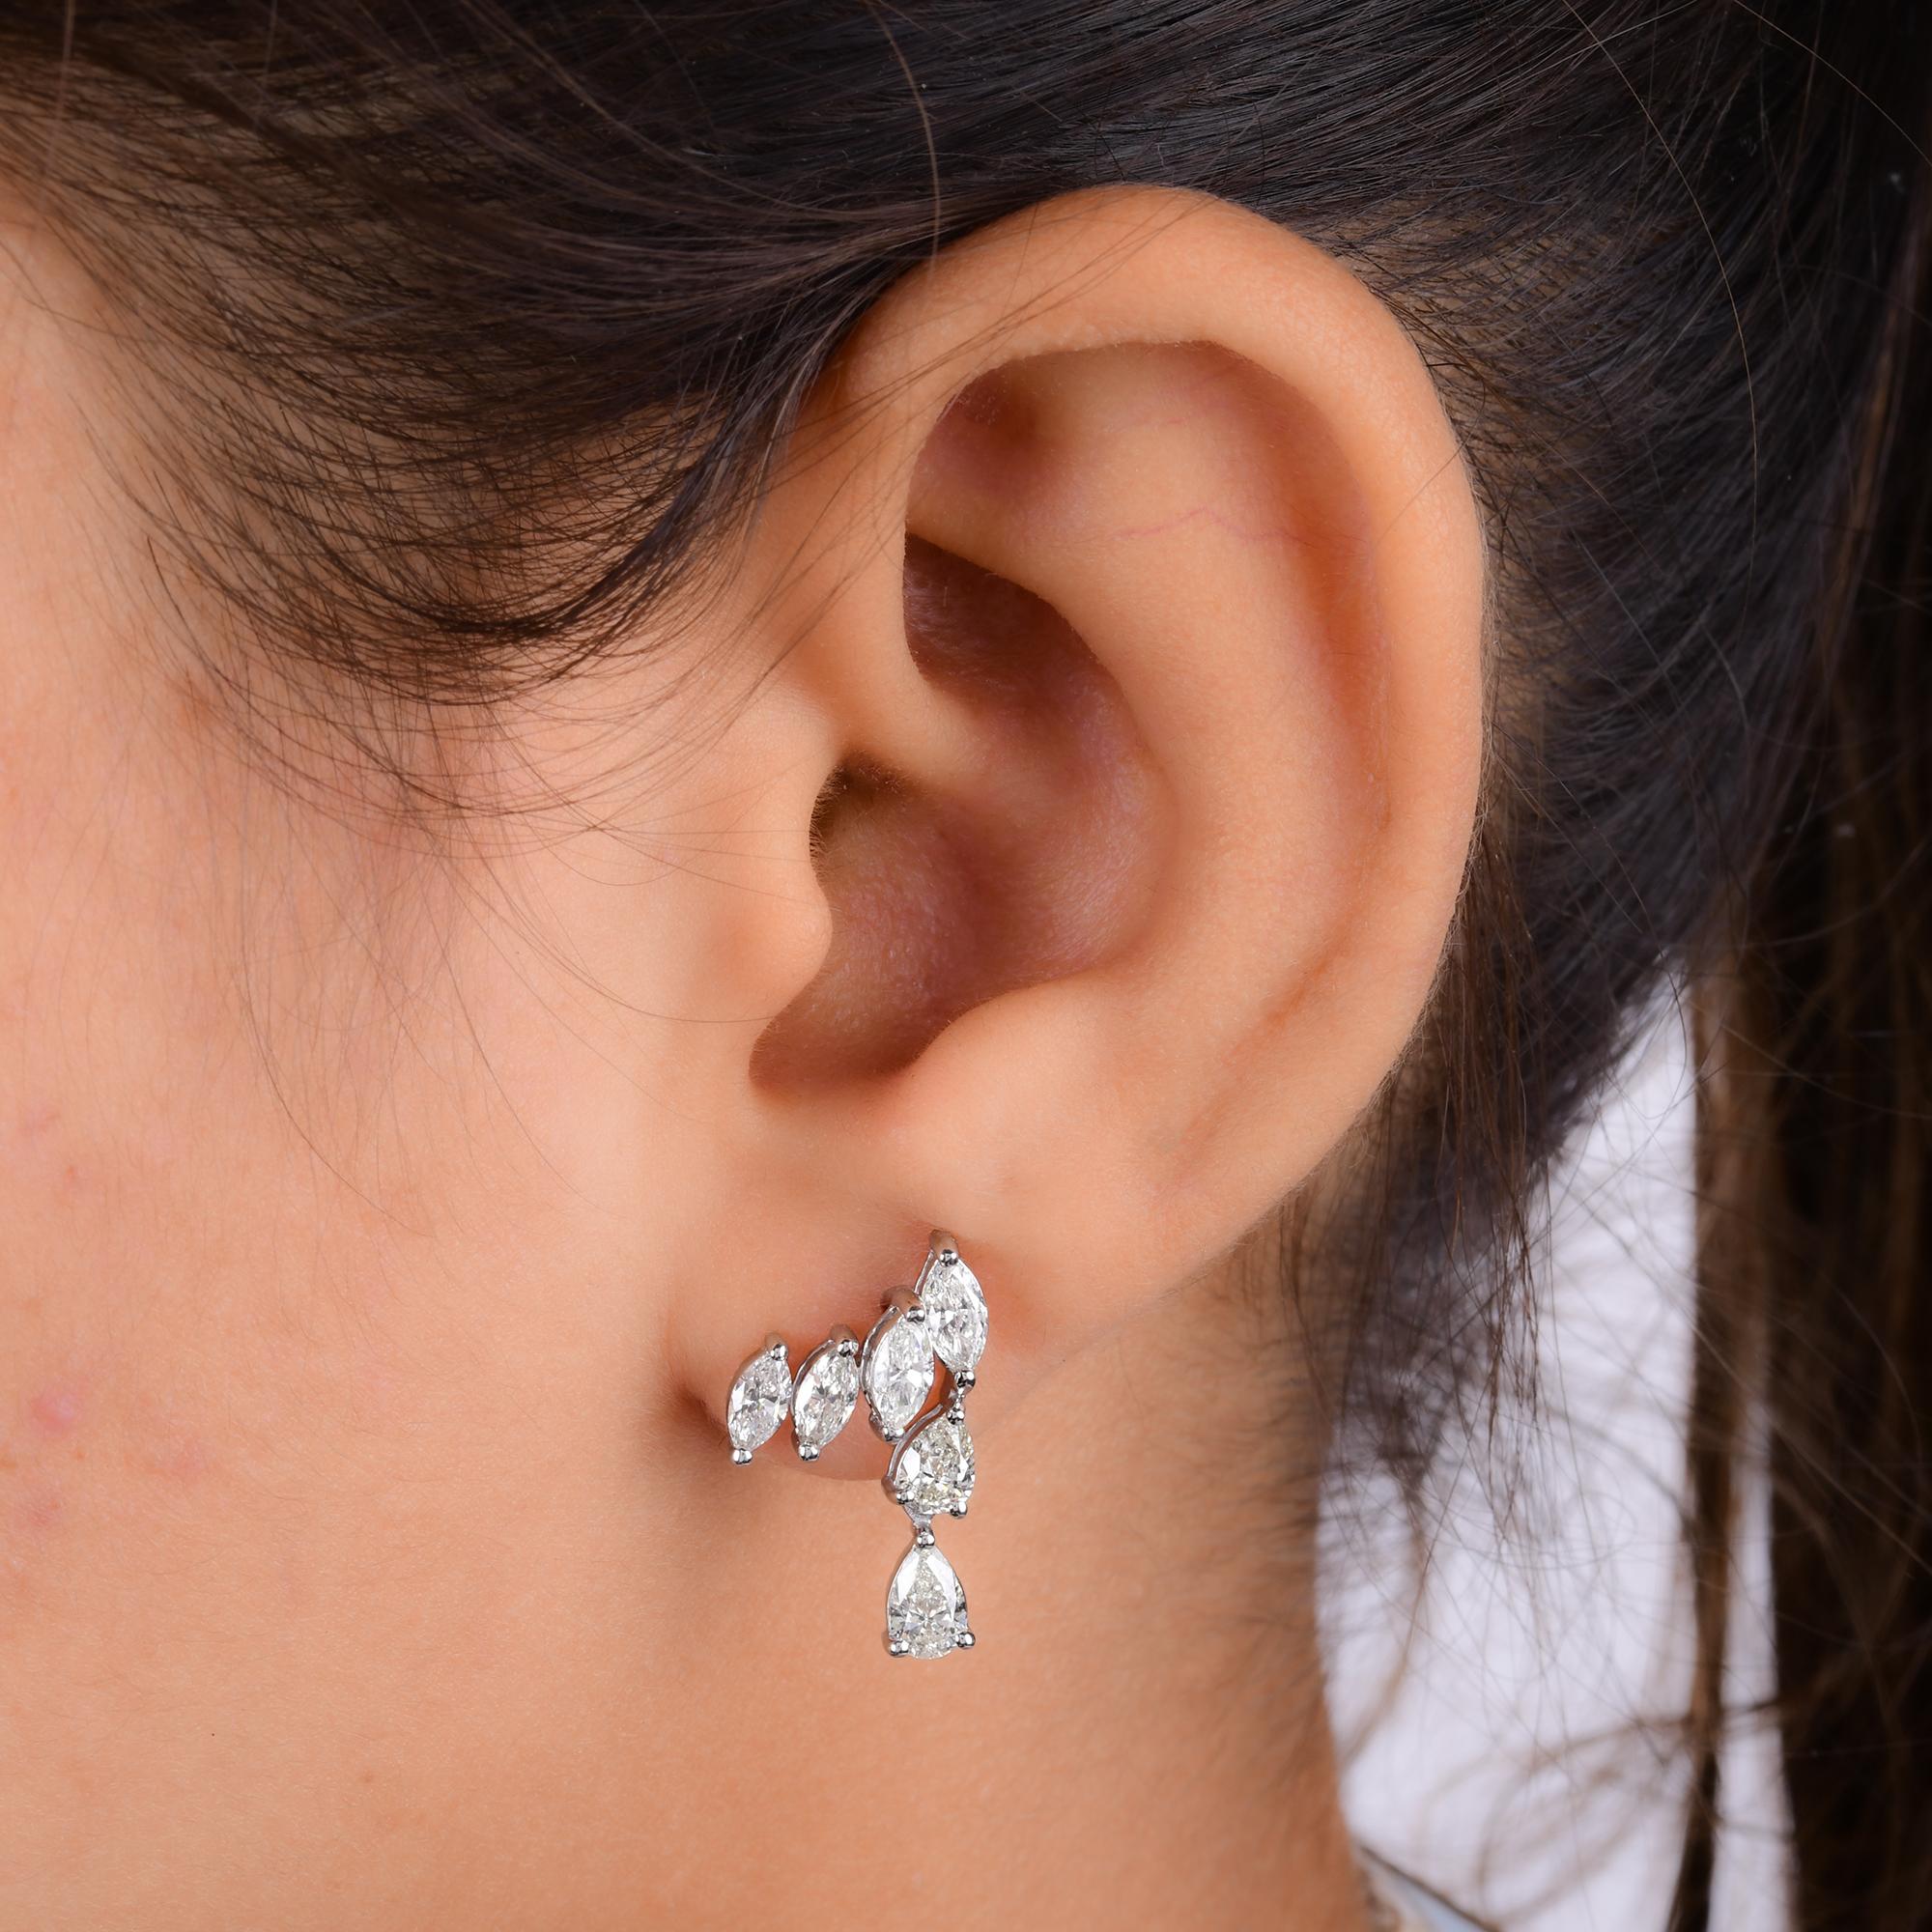 Modern Natural 2.26 Carat Pear & Marquise Diamond Earrings 18 Karat White Gold Jewelry For Sale